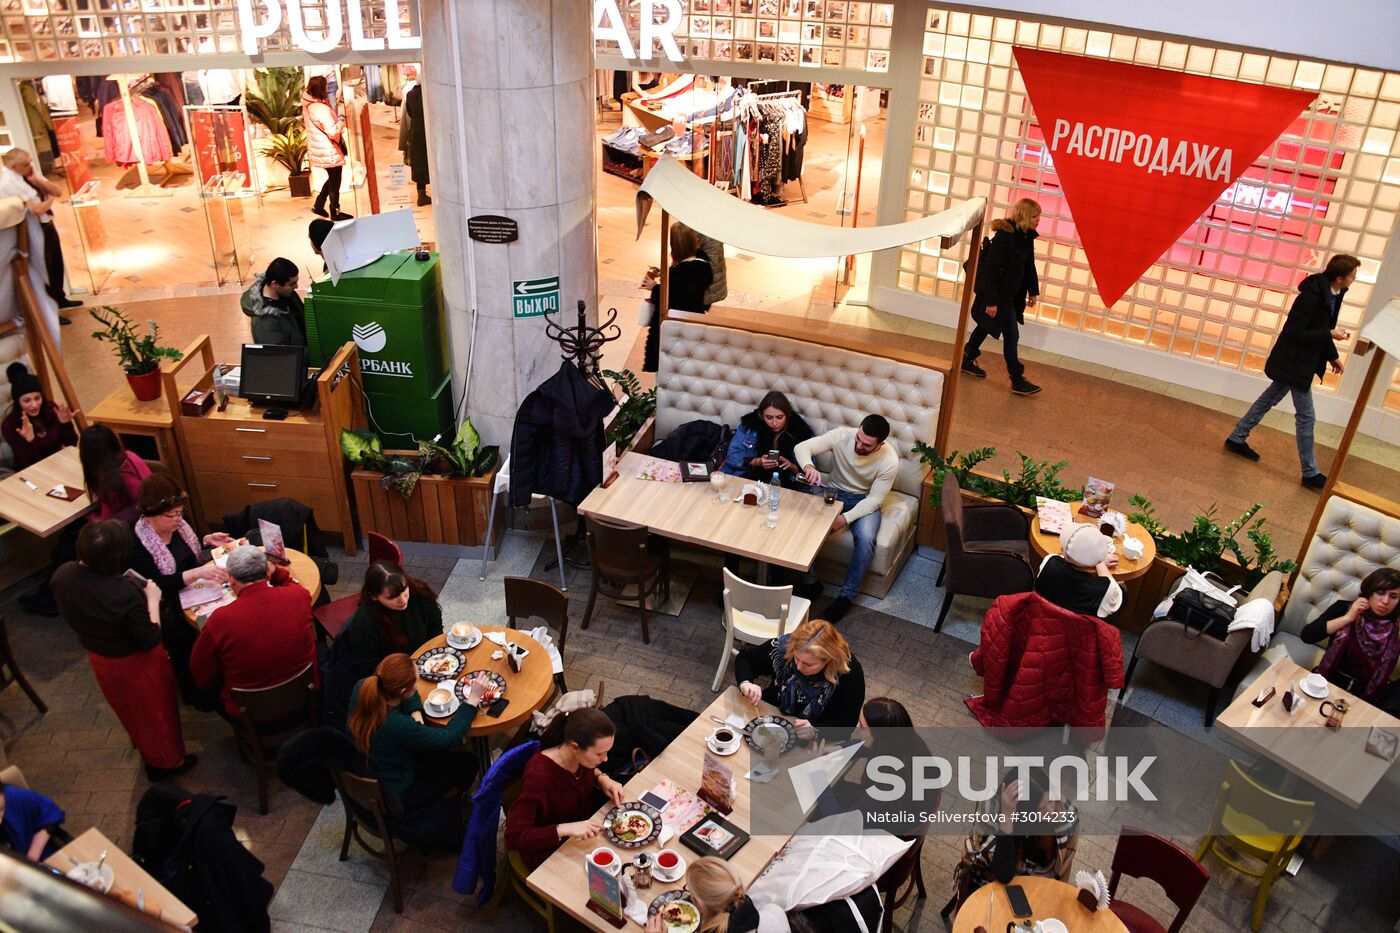 The Okhotny Ryad shopping mall in Moscow